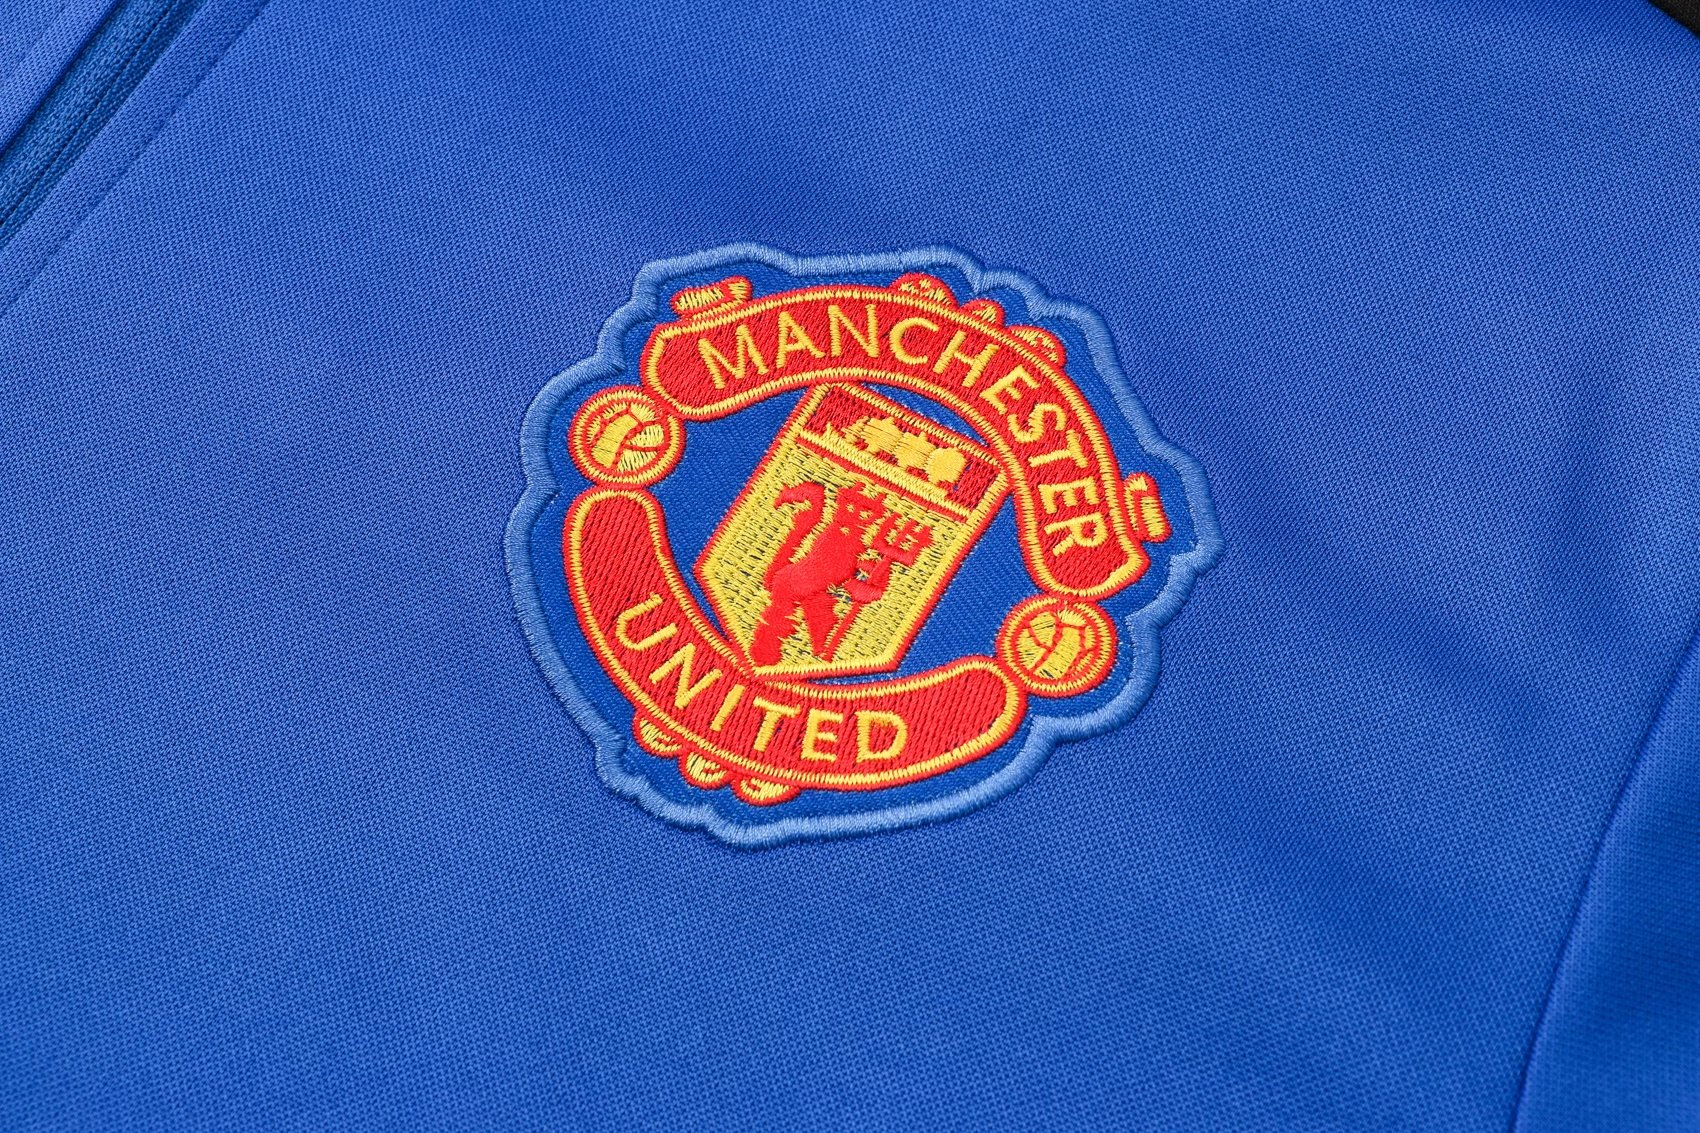 Manchester United Soccer Traning Suit Blue Mens 2021/22